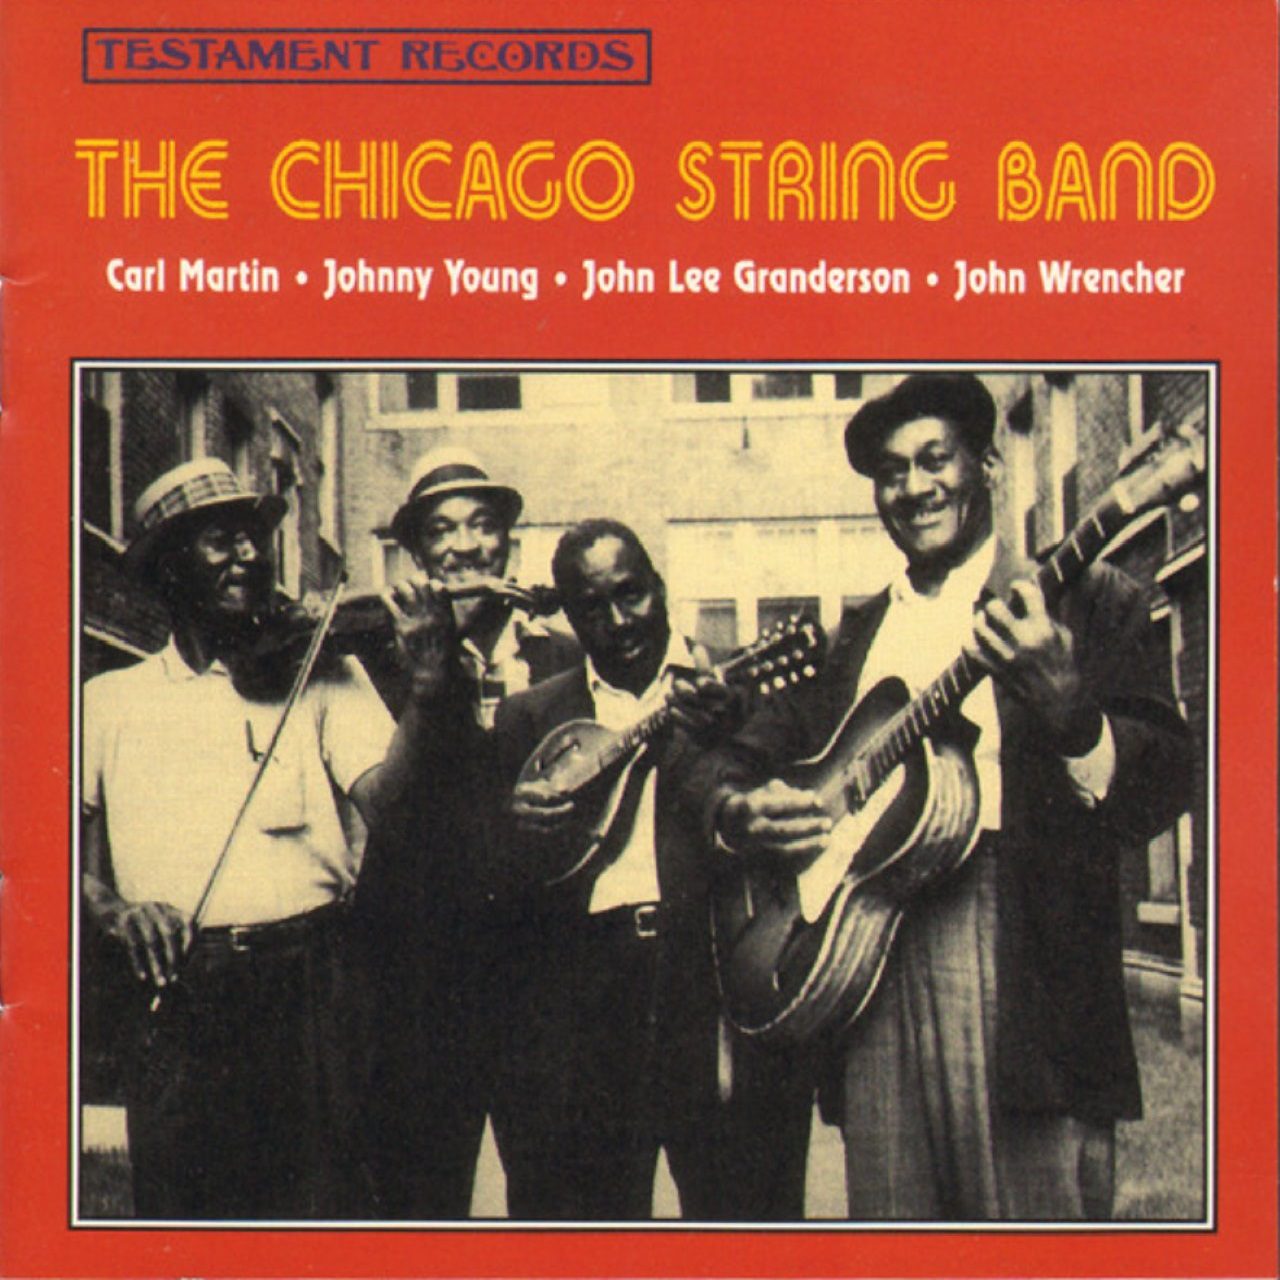 Chicago String Band – The Chicago String Band cover album